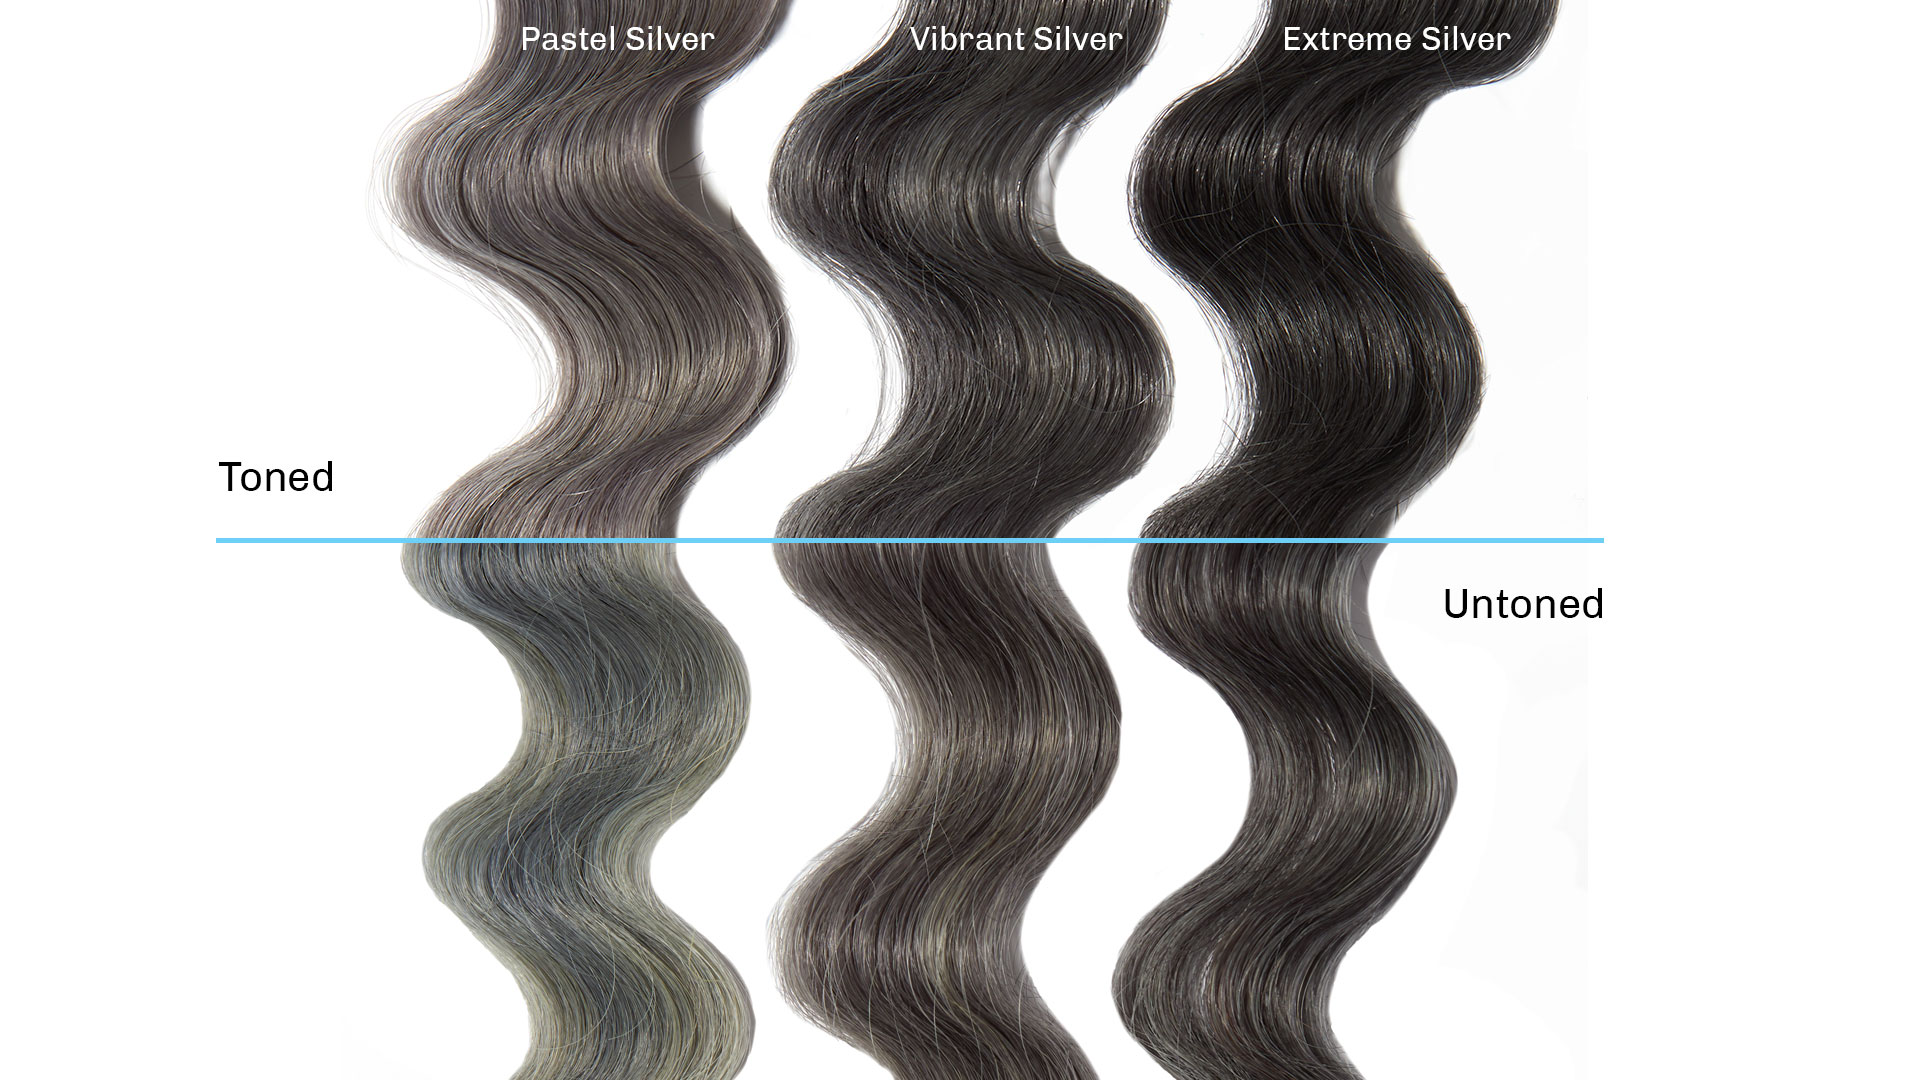 arsenal tilnærmelse kapsel How to Get Perfect Silver Hair & Cancel Out Green or Blue Tones